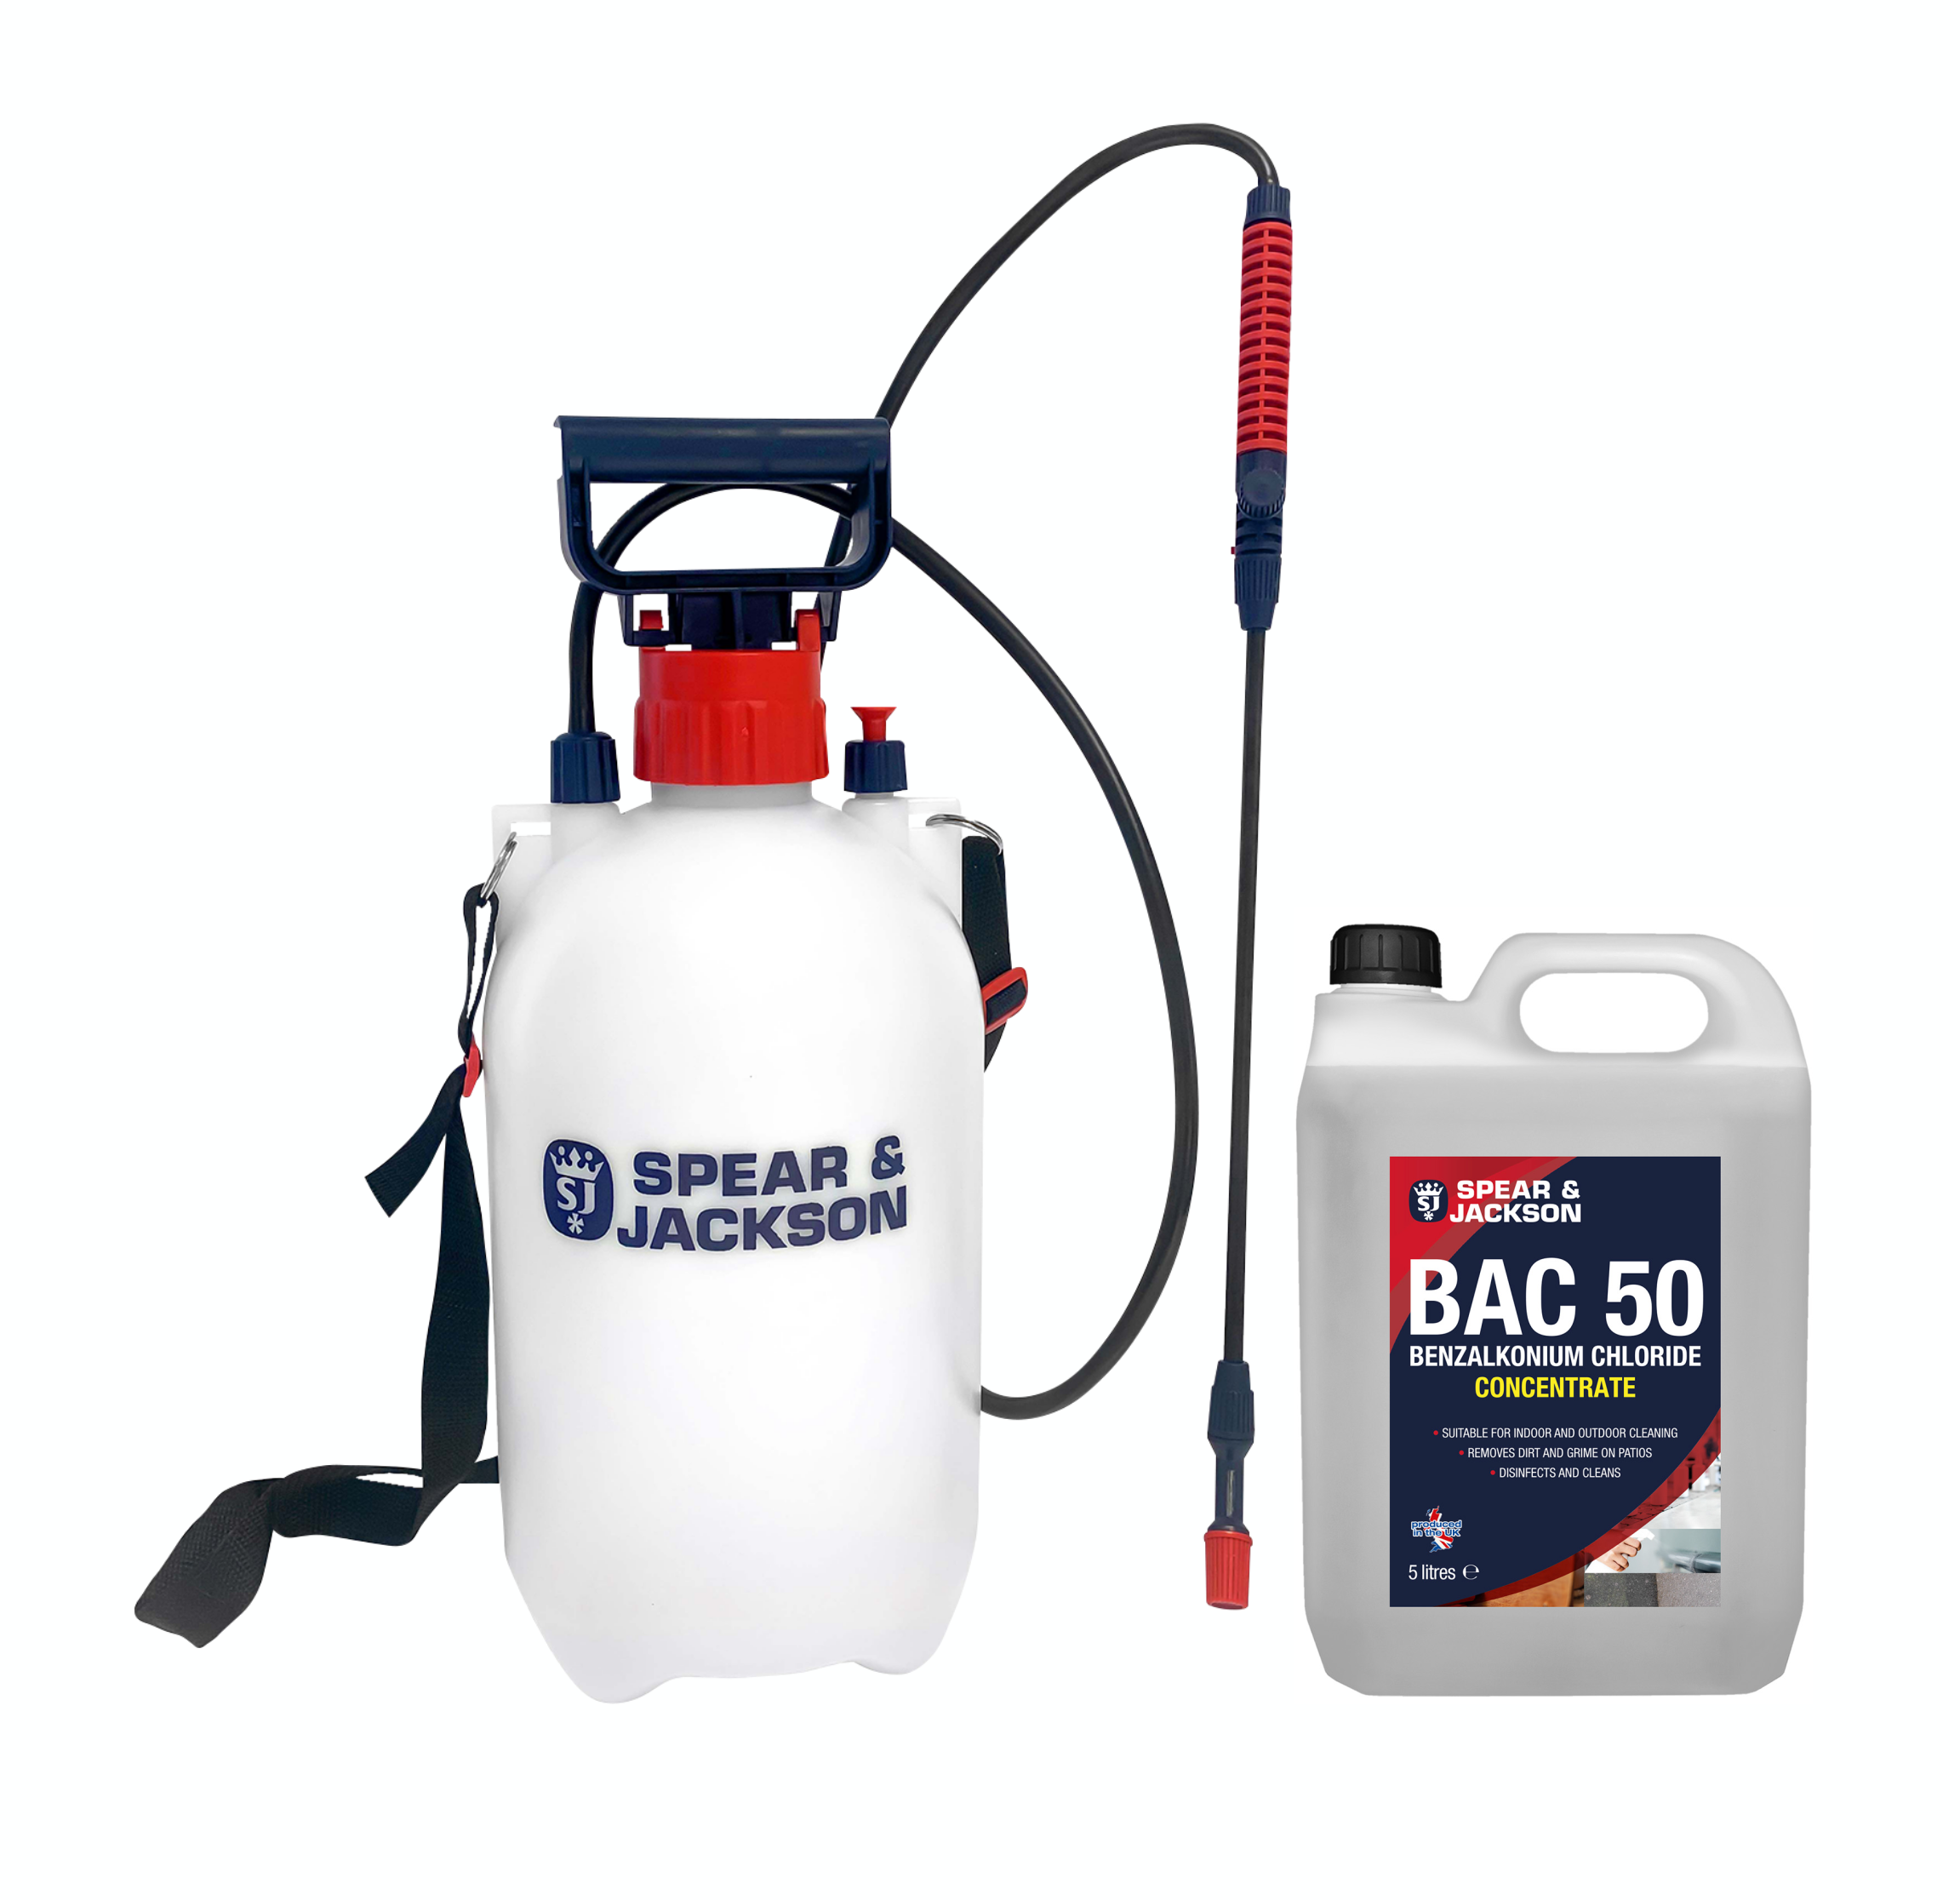 BAC 50 Benzalkonium Chloride Concentrated 5L with 5L Sprayer Spear & Jackson